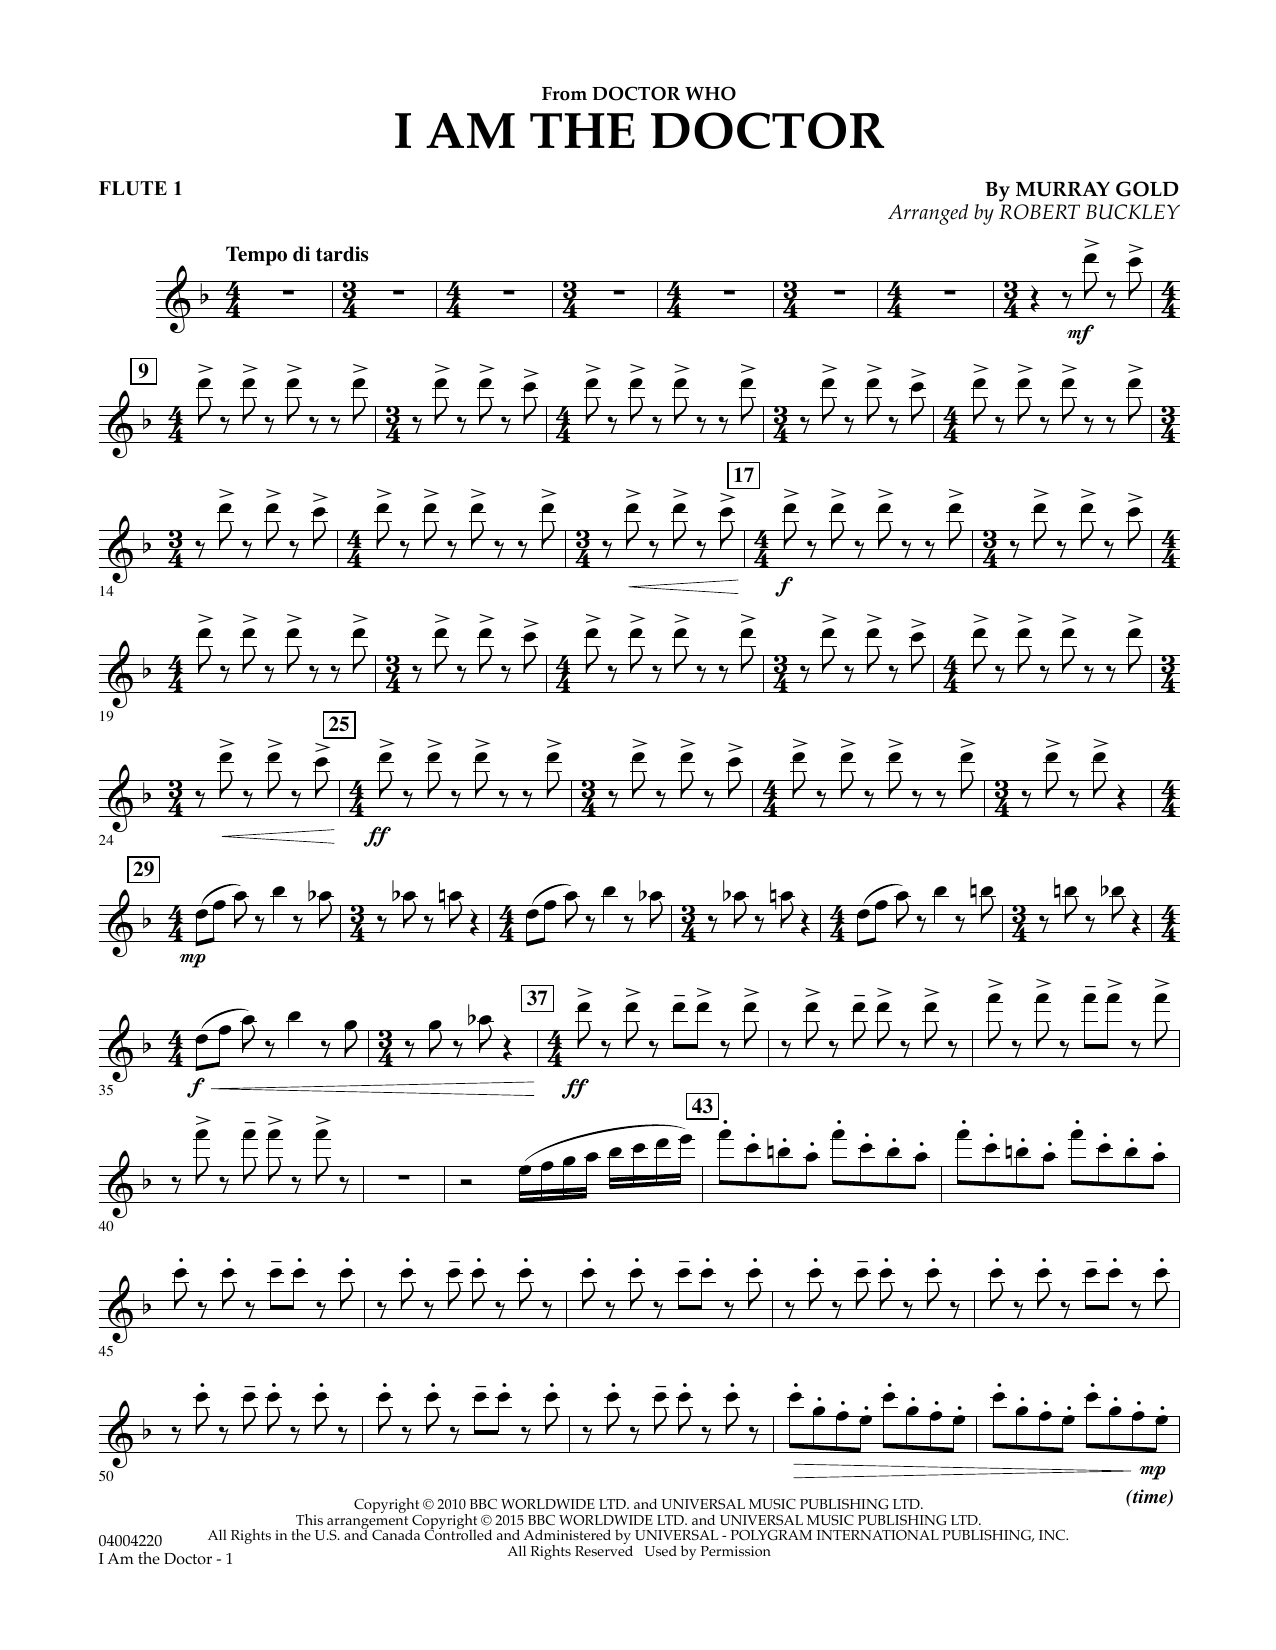 Robert Buckley I Am the Doctor (from Doctor Who) - Flute 1 sheet music notes and chords. Download Printable PDF.